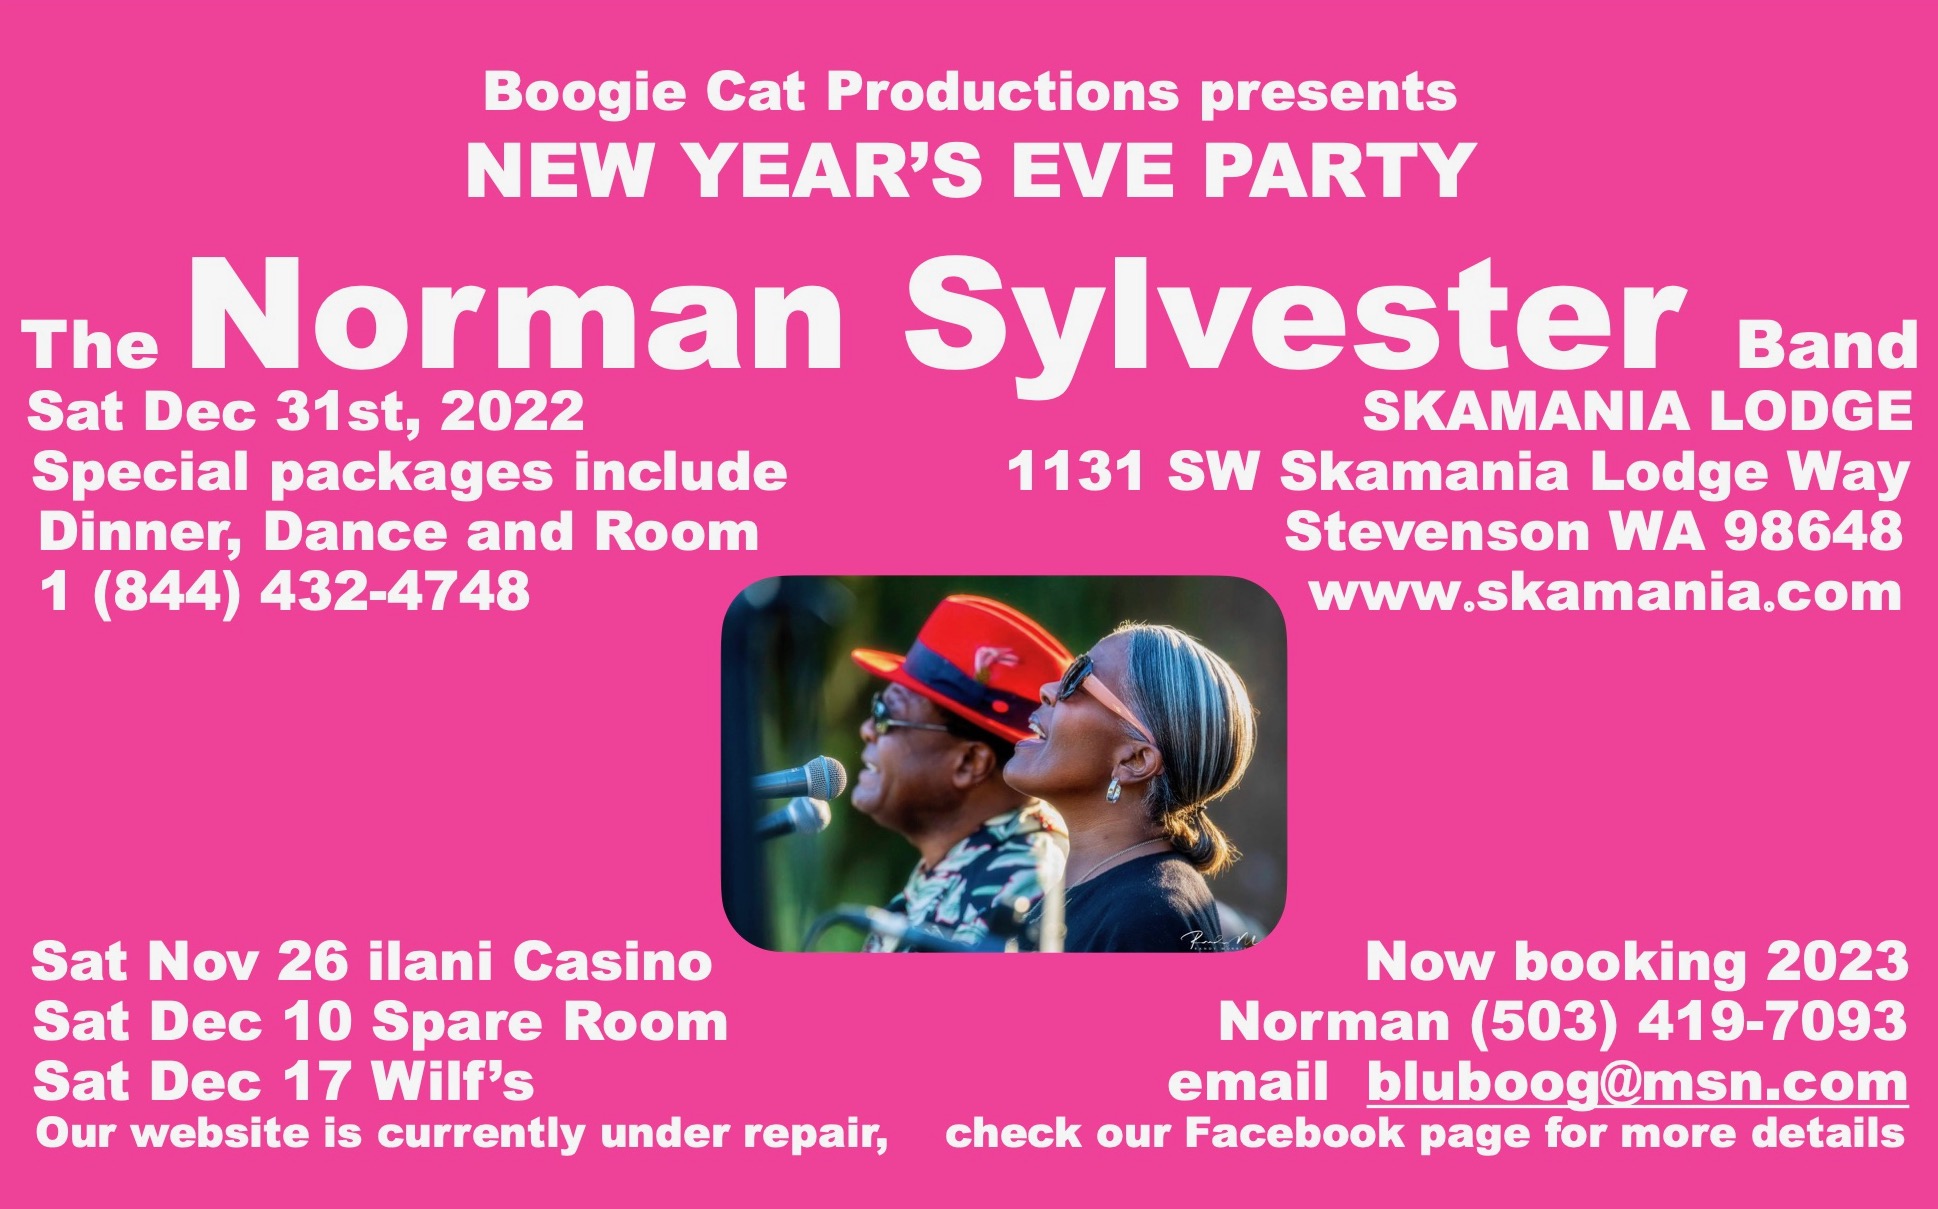 Boogie Cat Productions presents New Years Eve Party The Norman Sylvester Band  Sat Dec 31st, 2022 Special packages include Dinner, Dance, and Room 1 (844) 432-4748  Skamania Lodge 1131 SW Skamania Lodge Way Stevenson WA  98648 www.skamania.com  Sat Nov 26   ilani Casino Sat Dec 10   Spare Room Sat Dec 17   Wilf's  Now booking 2023 Norman (503) 419-7093 email  bluboog@msn.com  Our website is currently under repair, check our Facebook page for more details